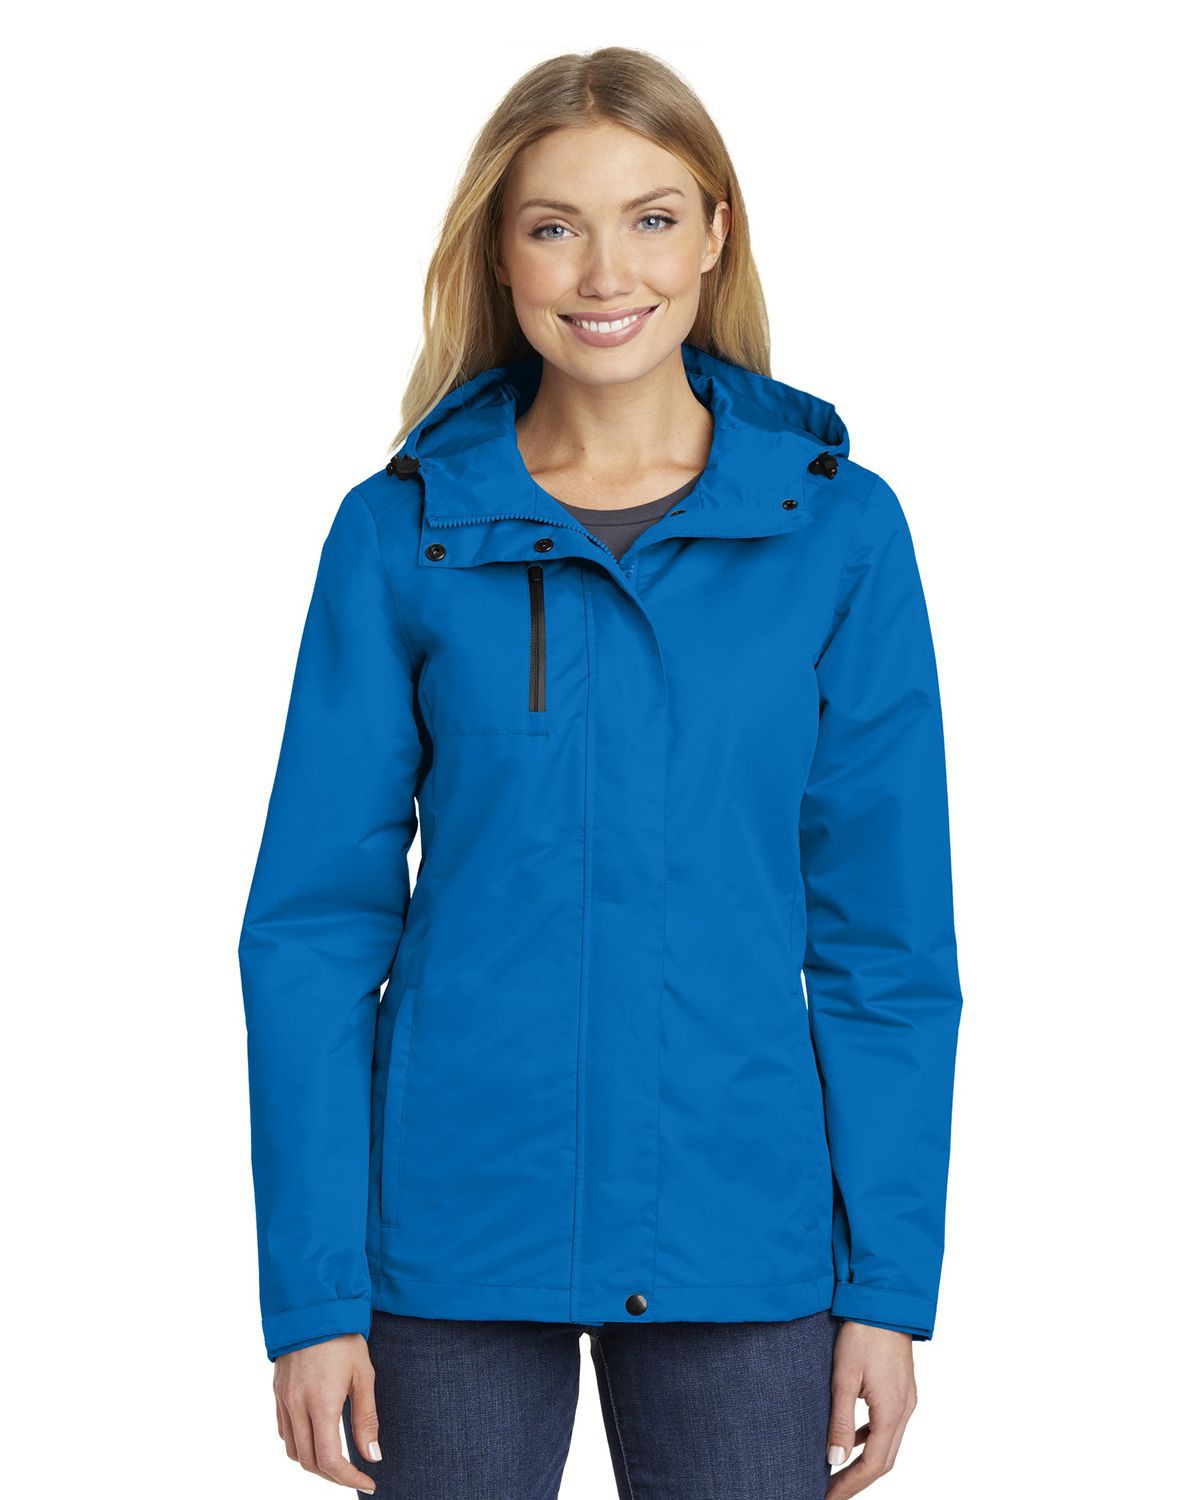 'Port Authority L331 Ladies All-Conditions Jacket'